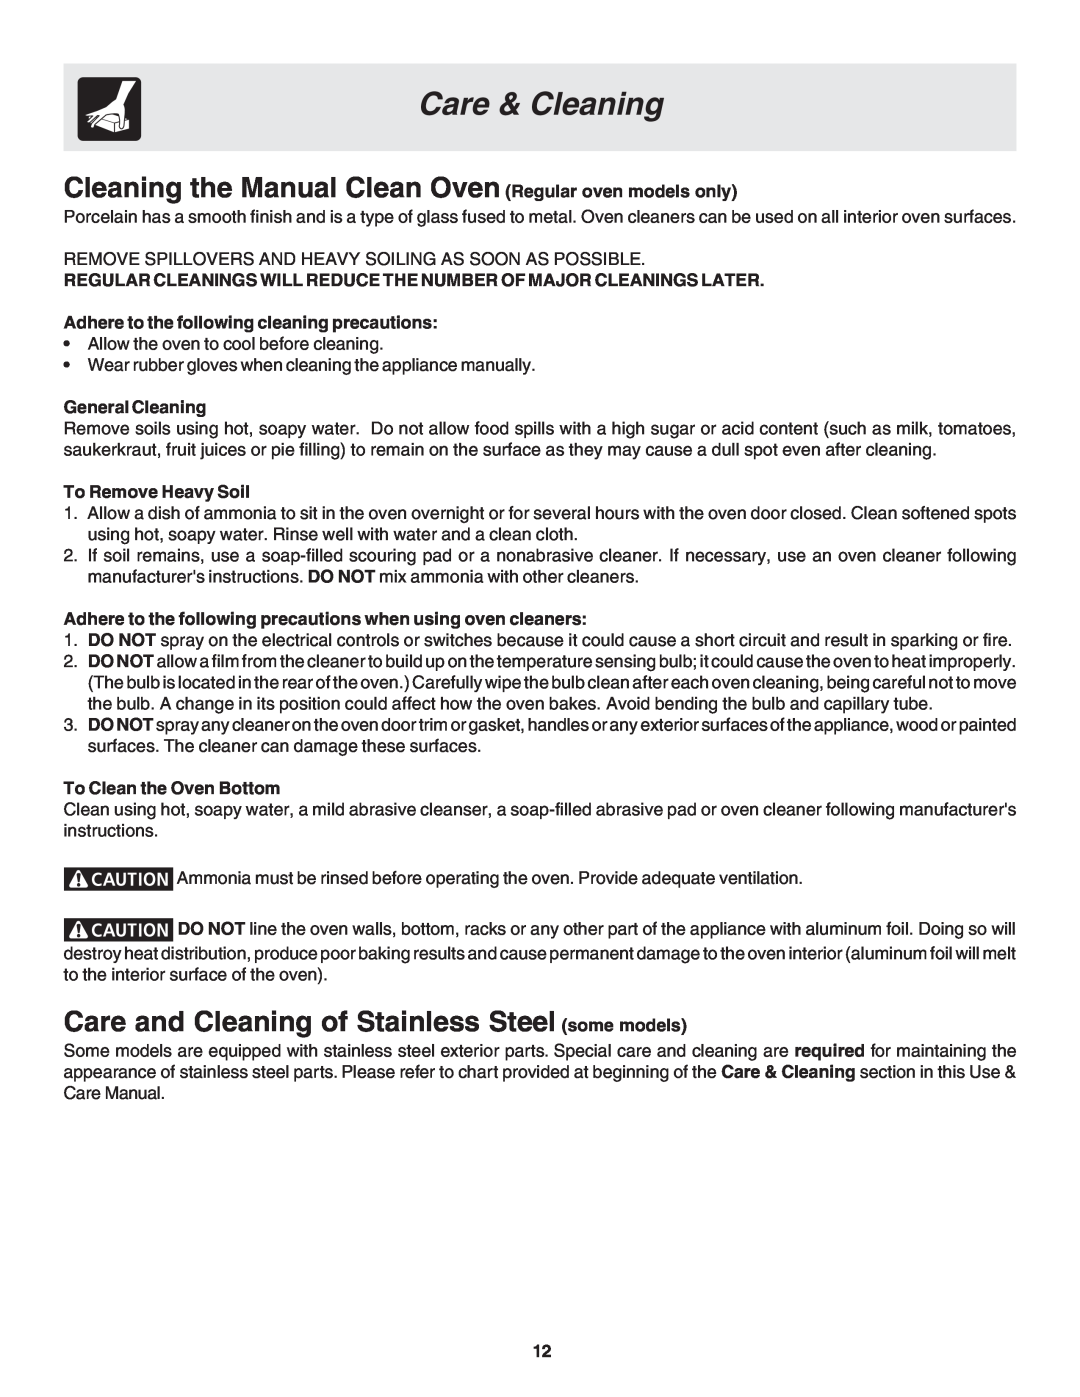 Frigidaire 318200943 warranty Care and Cleaning of Stainless Steel some models, Care & Cleaning, General Cleaning 